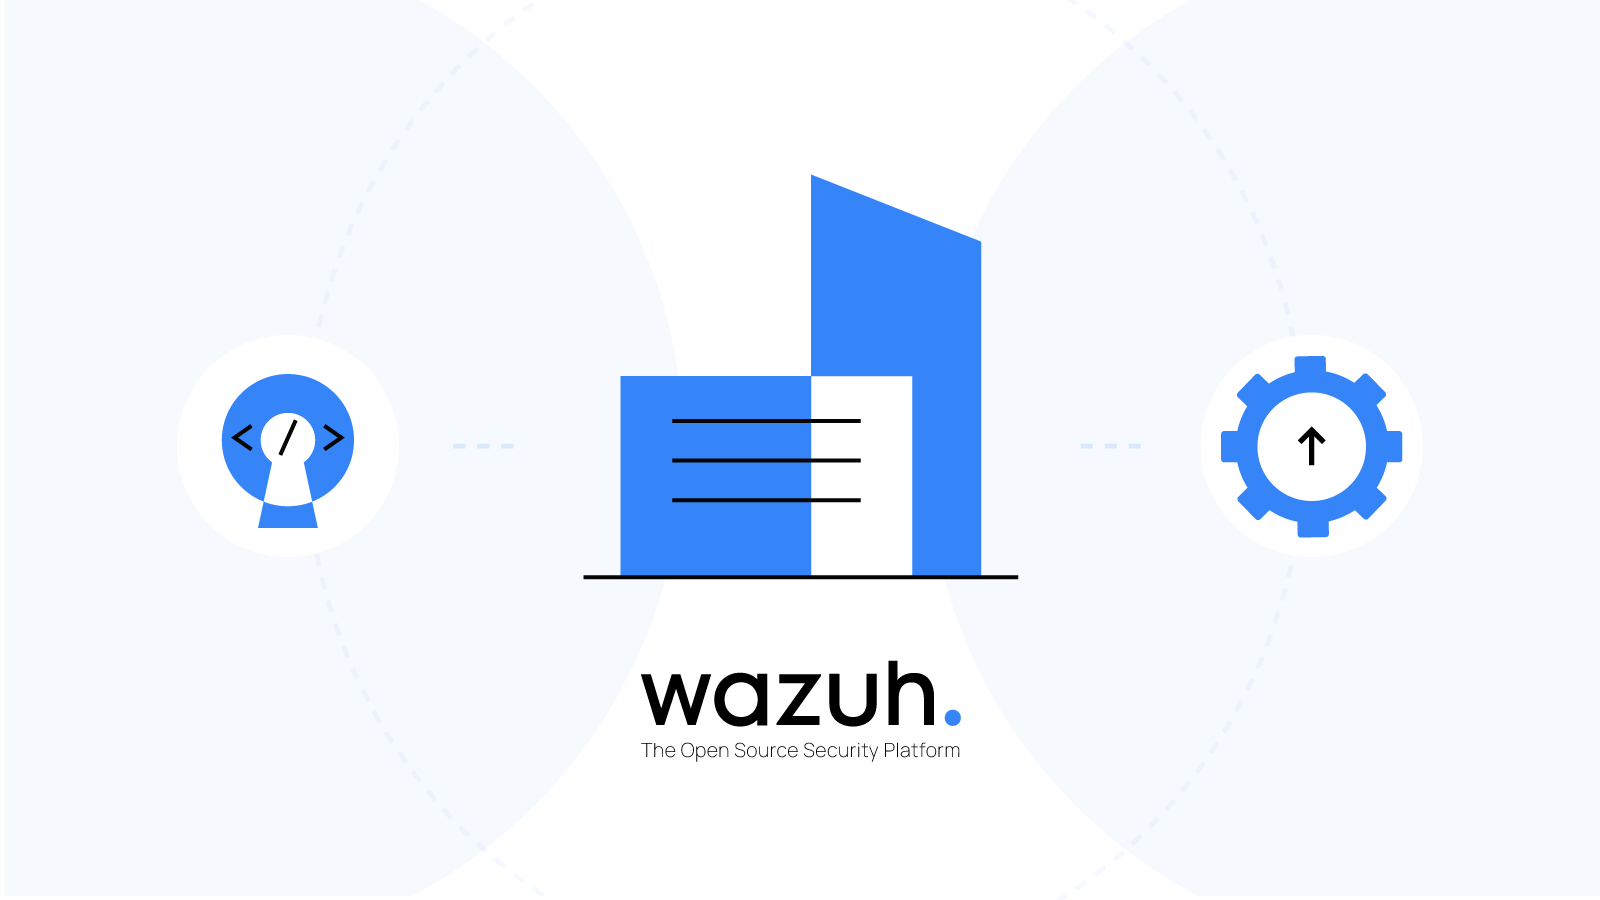 How SMEs can use Wazuh to improve cybersecurity – Source: www.bleepingcomputer.com